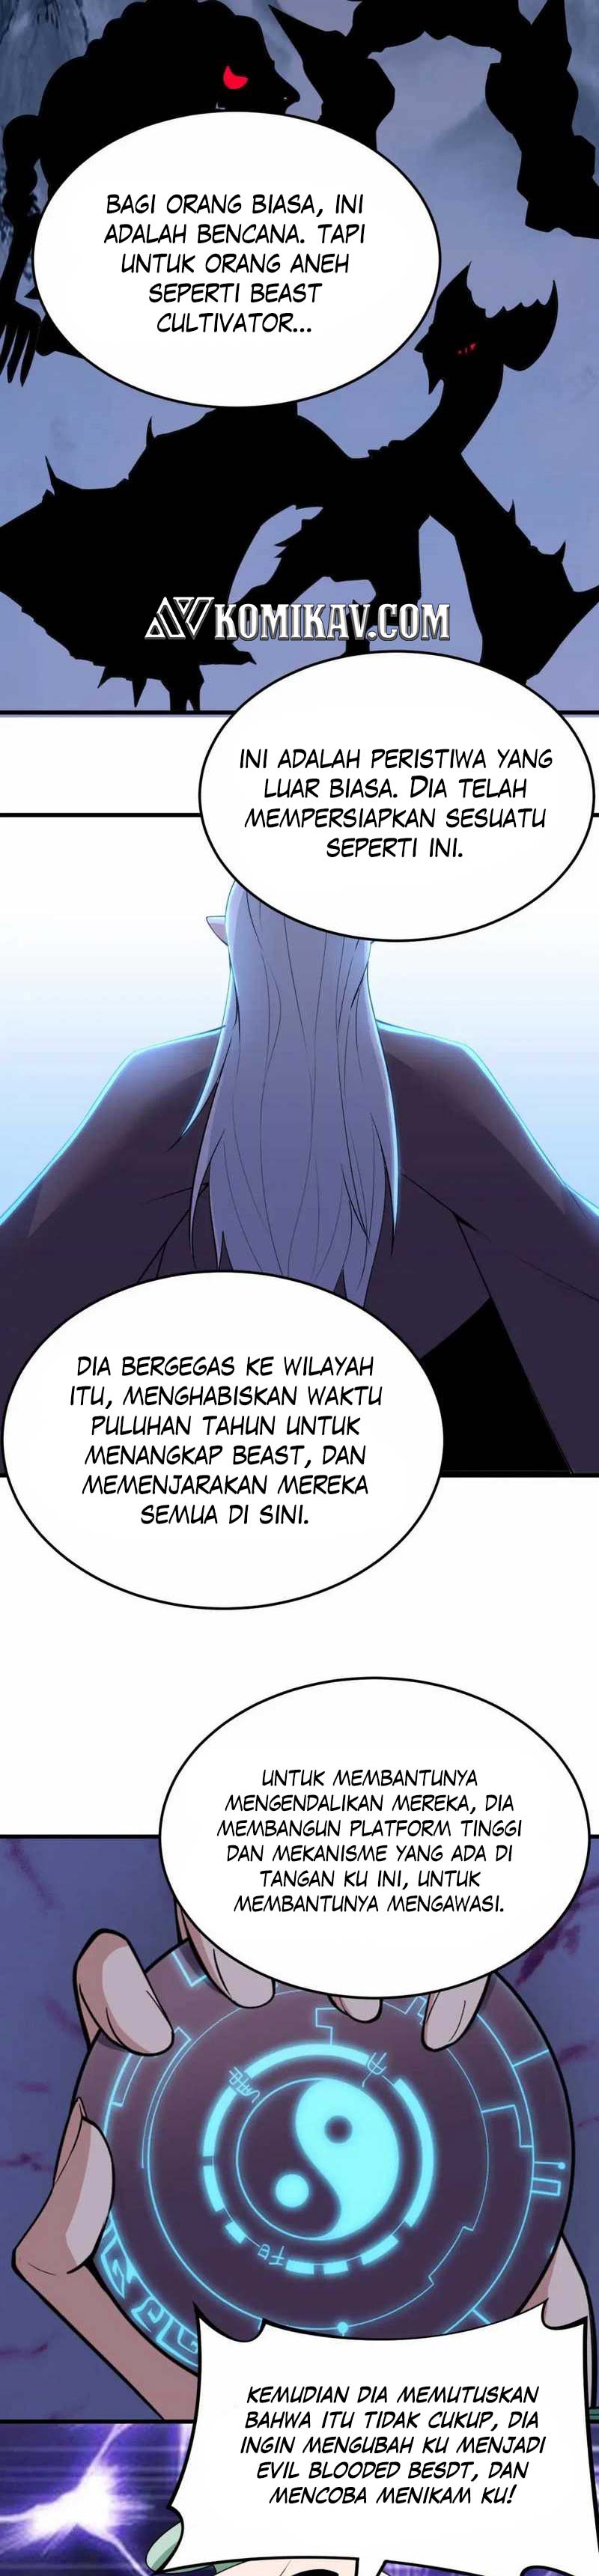 Dilarang COPAS - situs resmi www.mangacanblog.com - Komik i just want to be beaten to death by everyone 116 - chapter 116 117 Indonesia i just want to be beaten to death by everyone 116 - chapter 116 Terbaru 7|Baca Manga Komik Indonesia|Mangacan